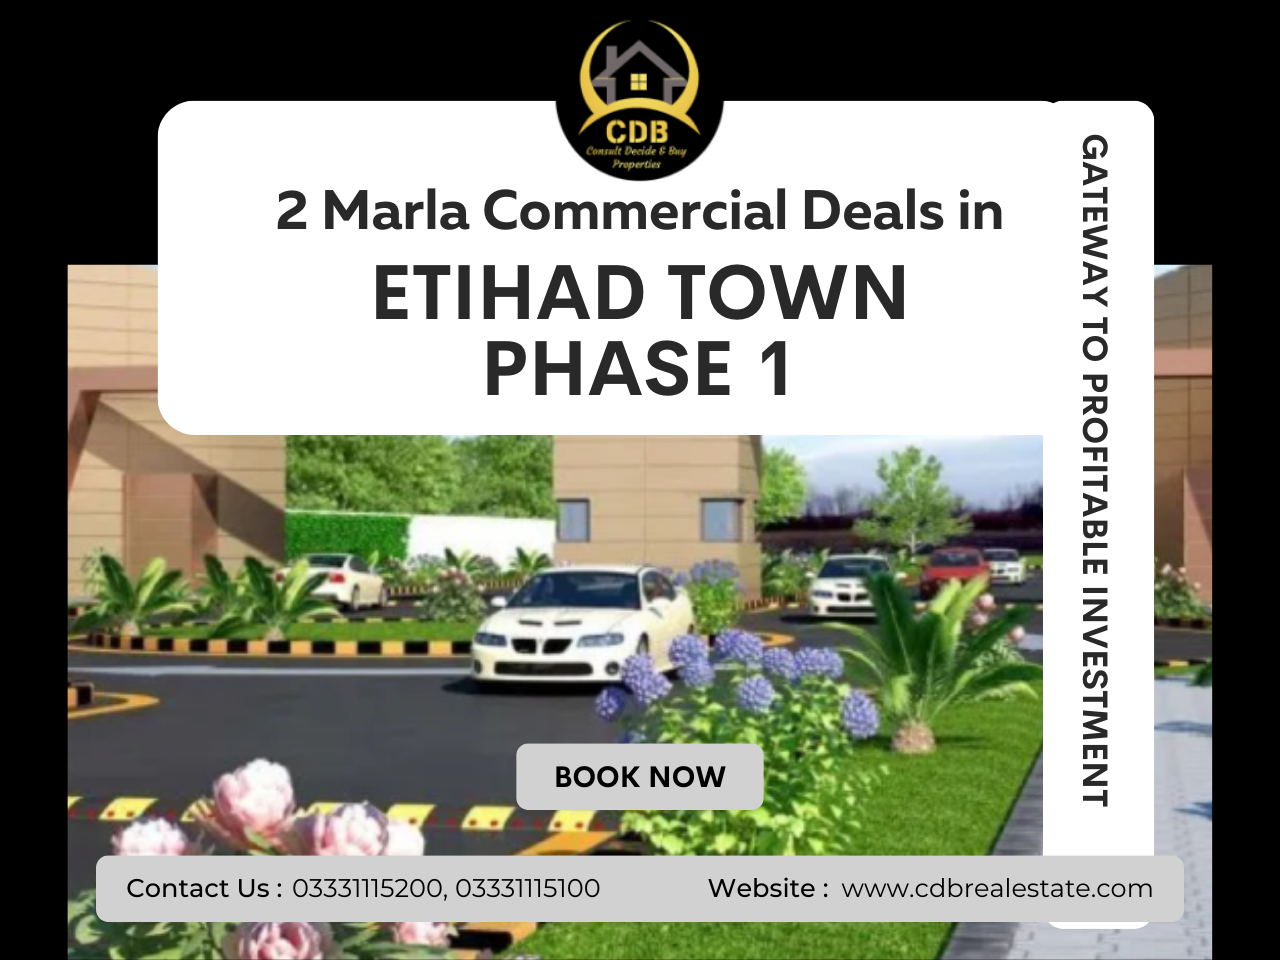 2 Marla Commercial Deals in Etihad Town Phase 1: Gateway to Profitable Investment